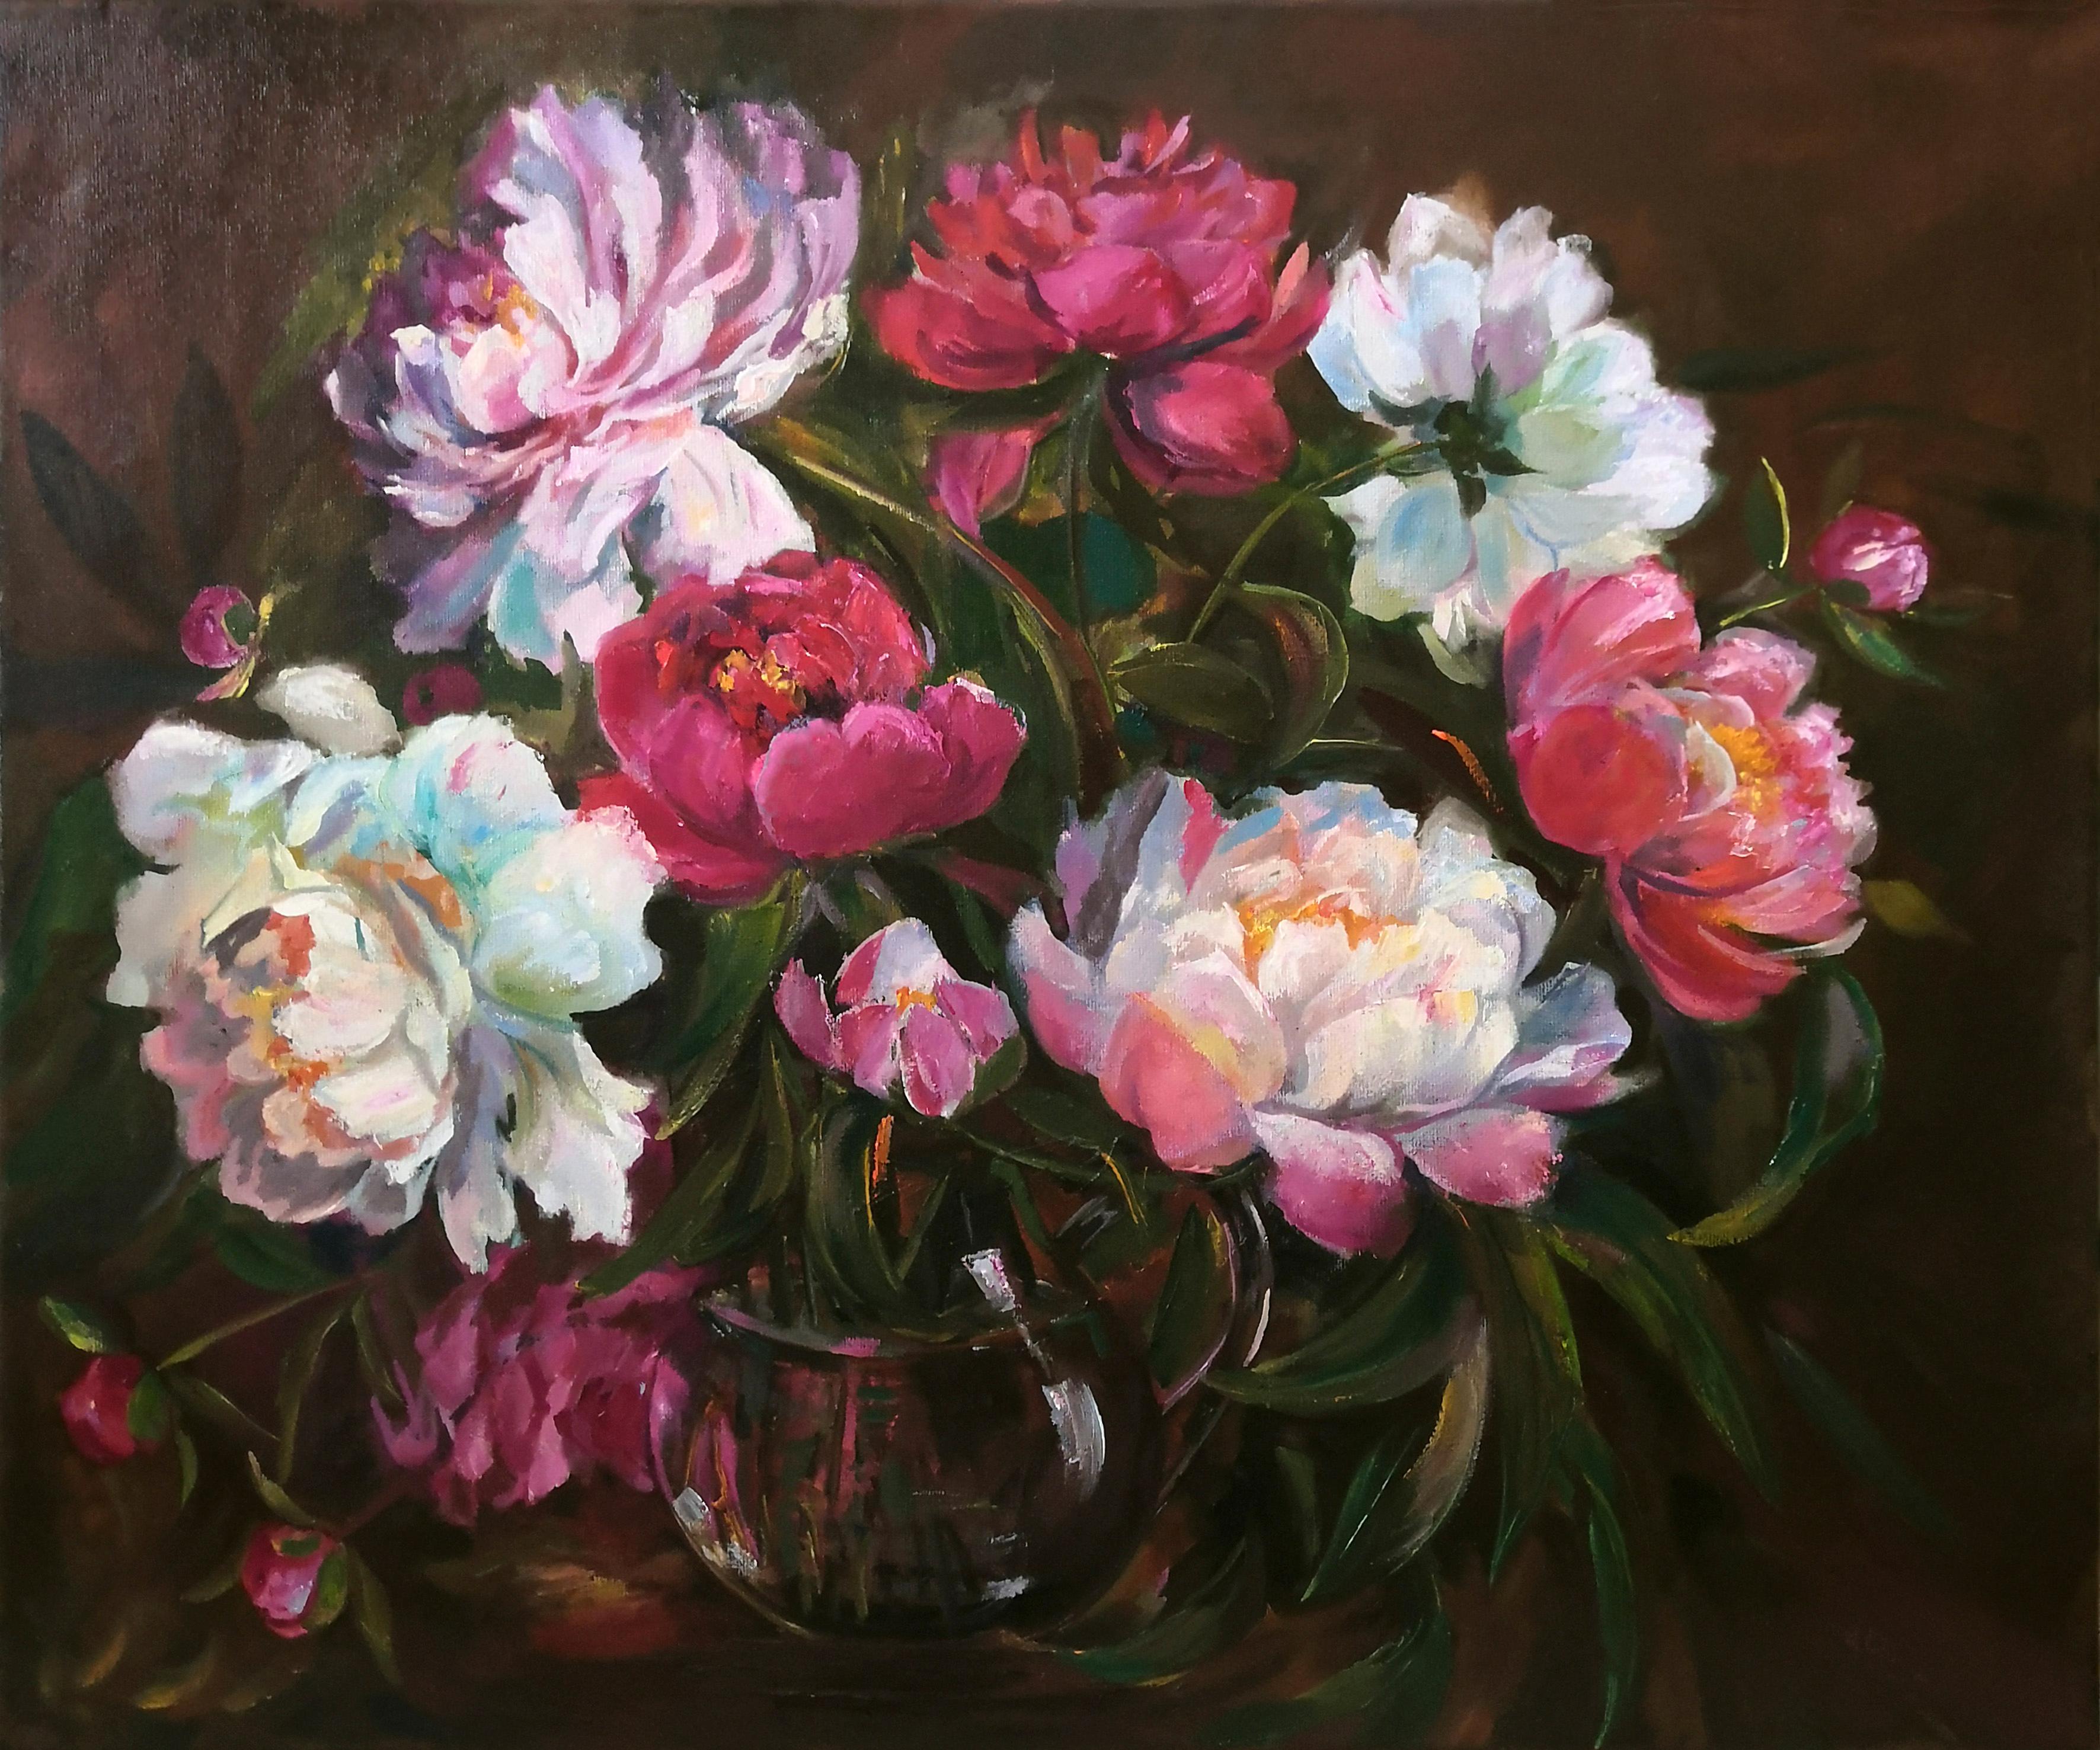 Red and white peonies in the style of Dutch masters